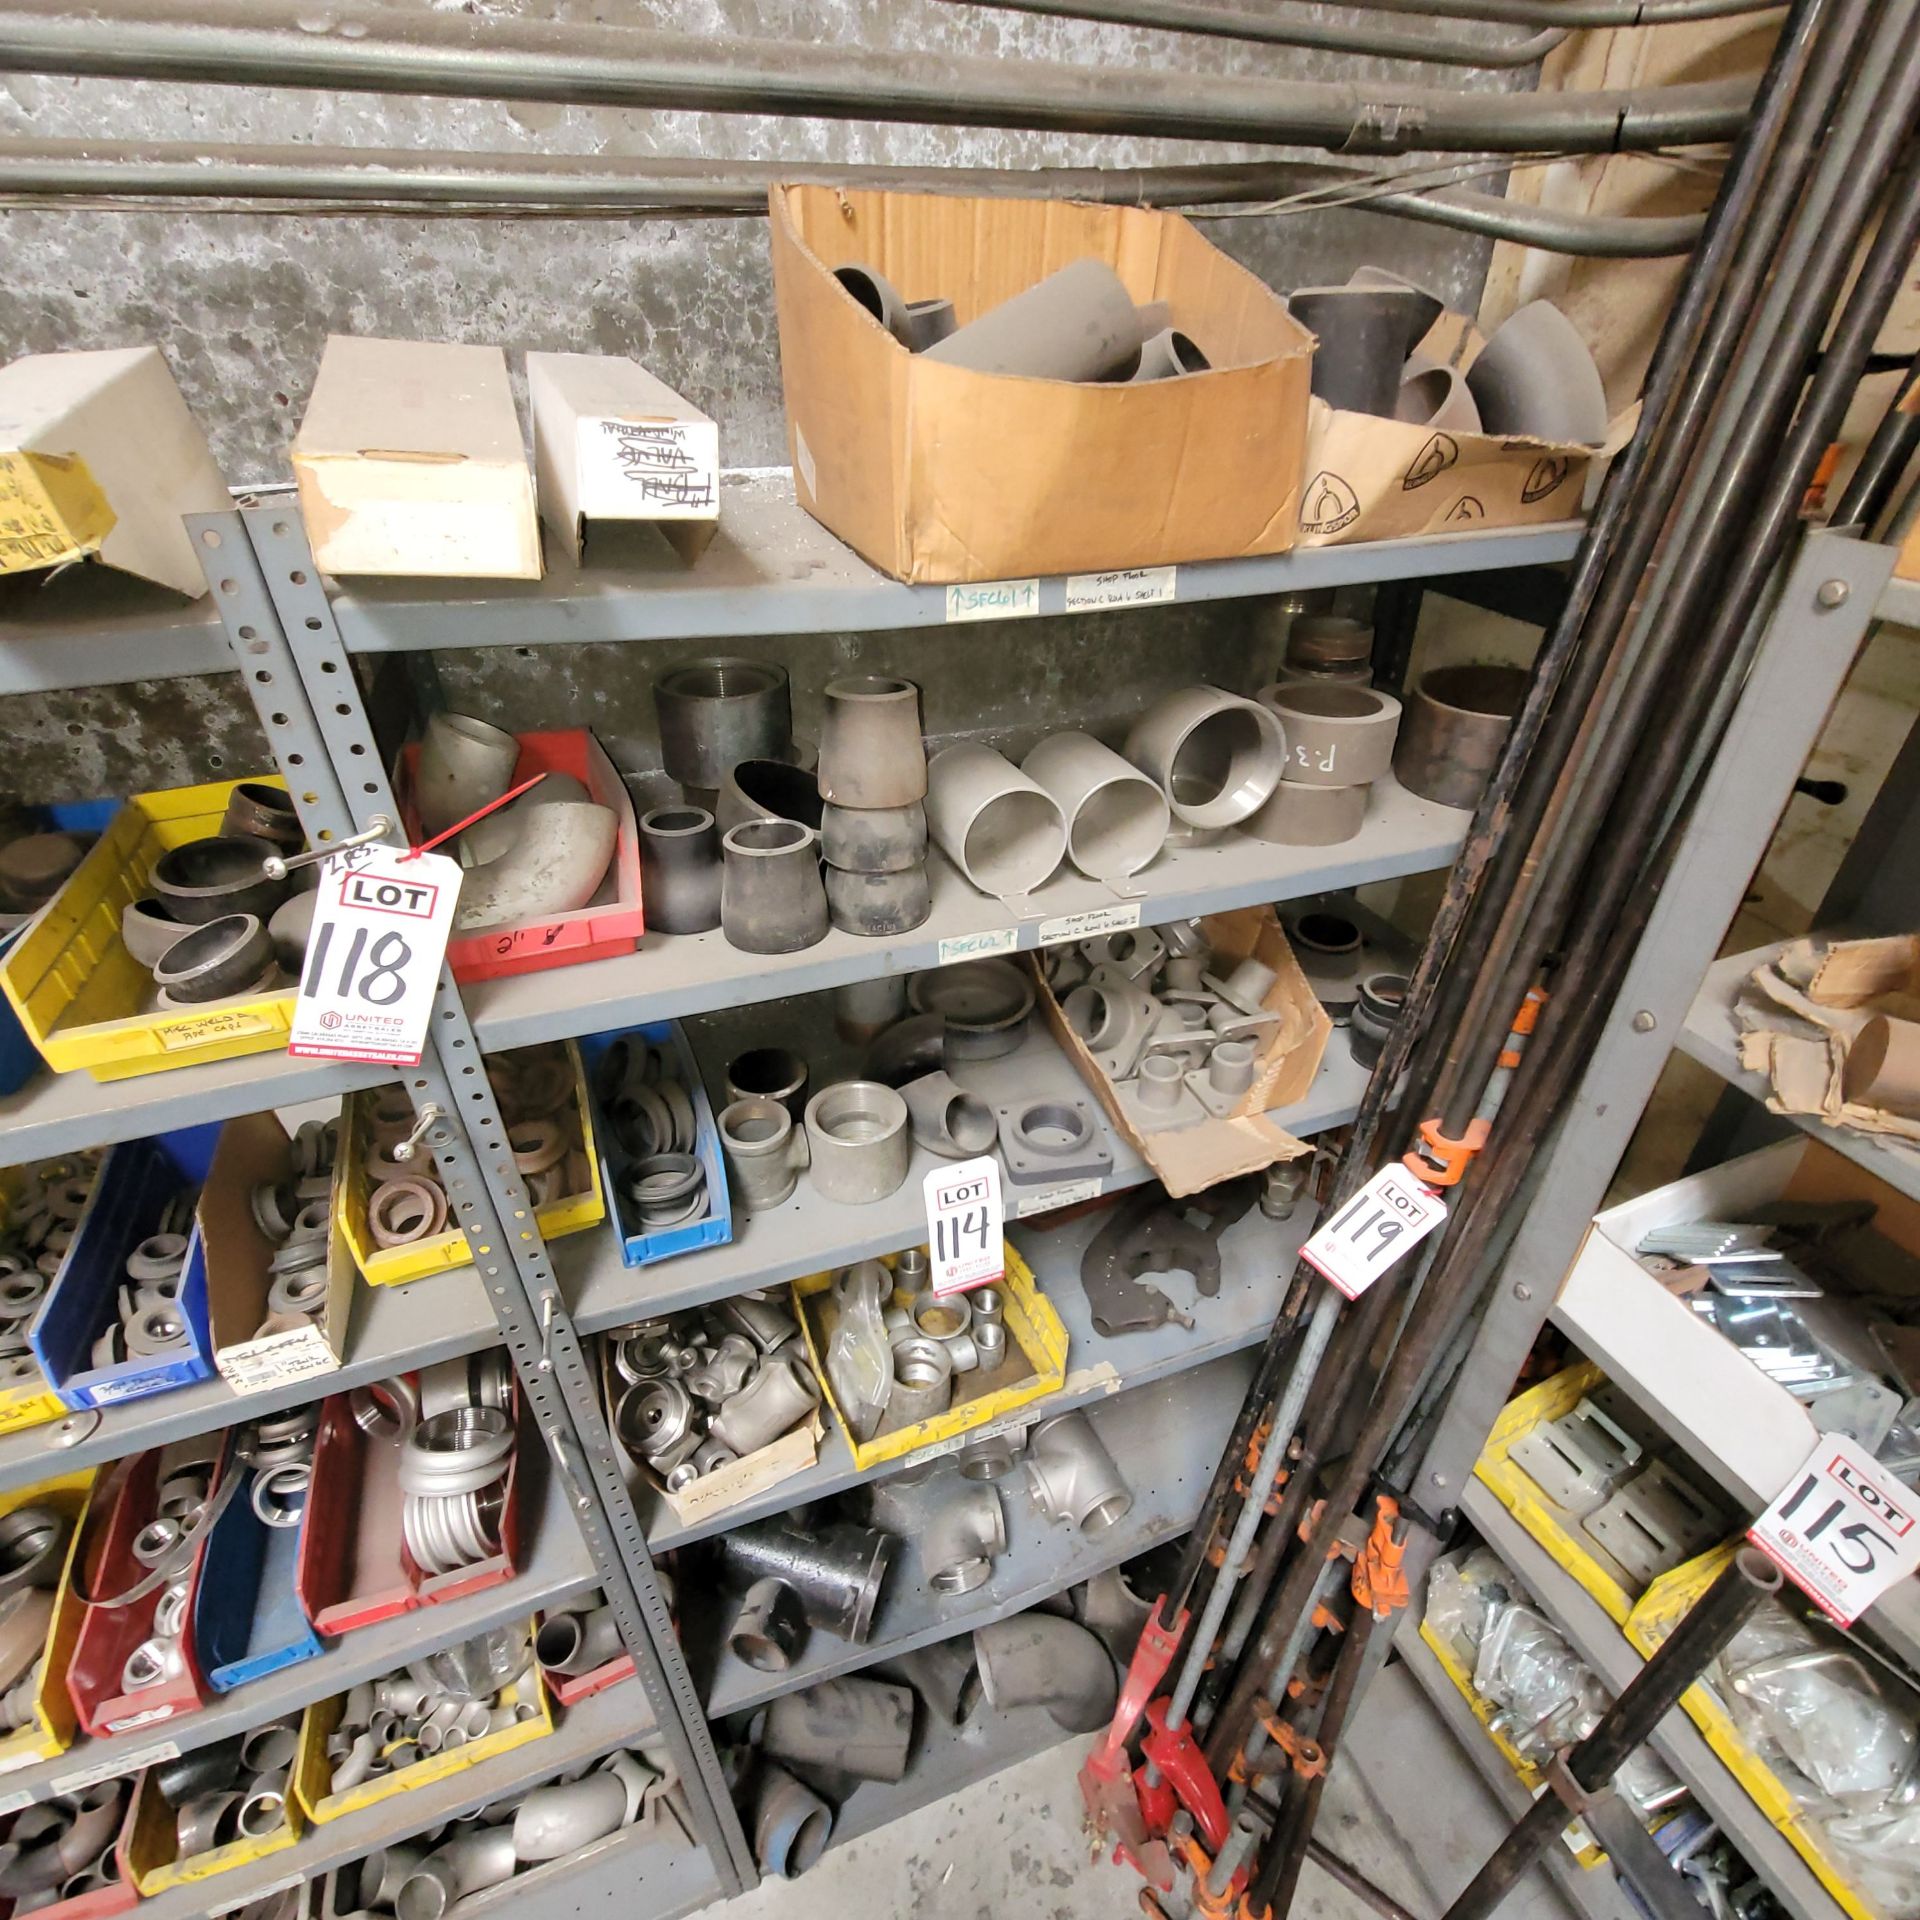 LOT - CONTENTS ONLY OF SHELF UNIT: LARGE PIPE FITTINGS, (2) LARGE PIPE CUTTERS